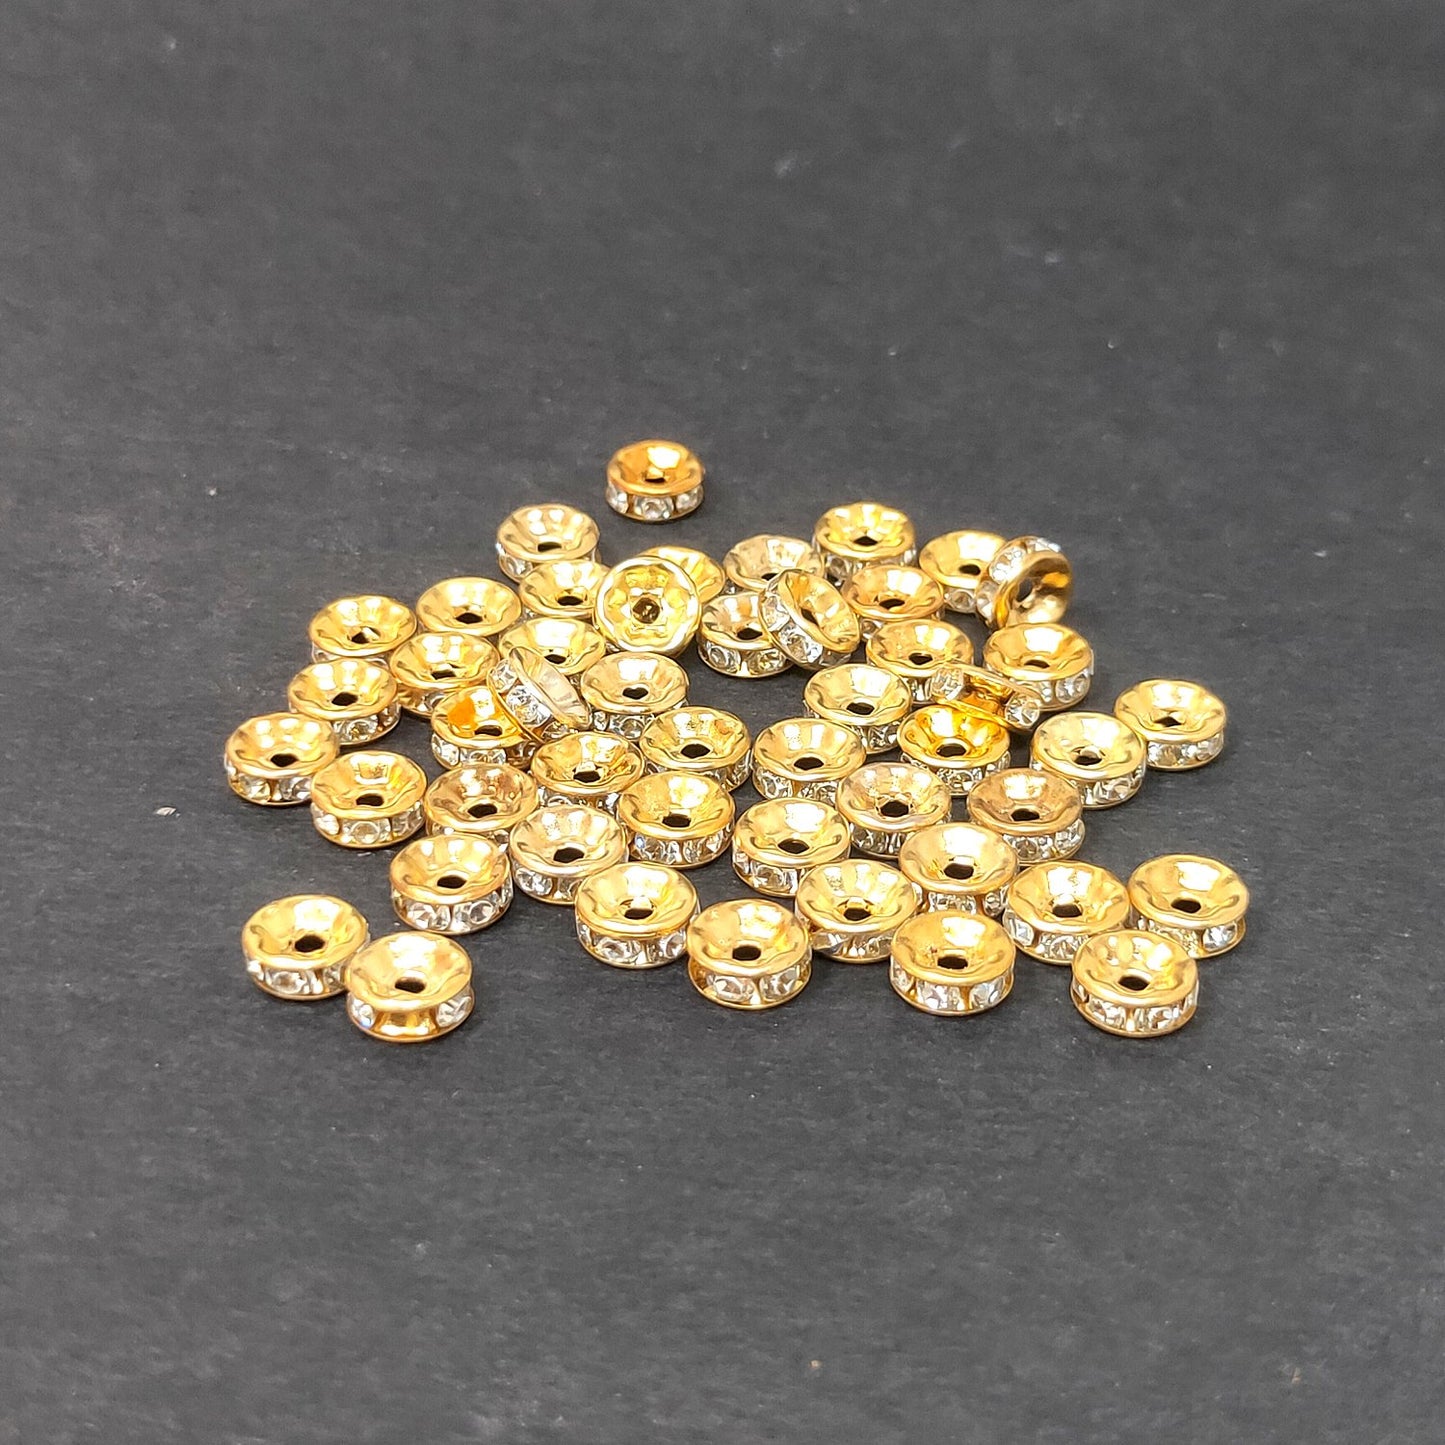 8 mm Spacer Beads with Stone Studded for Making Jewellery (100 Beads) - 96-21